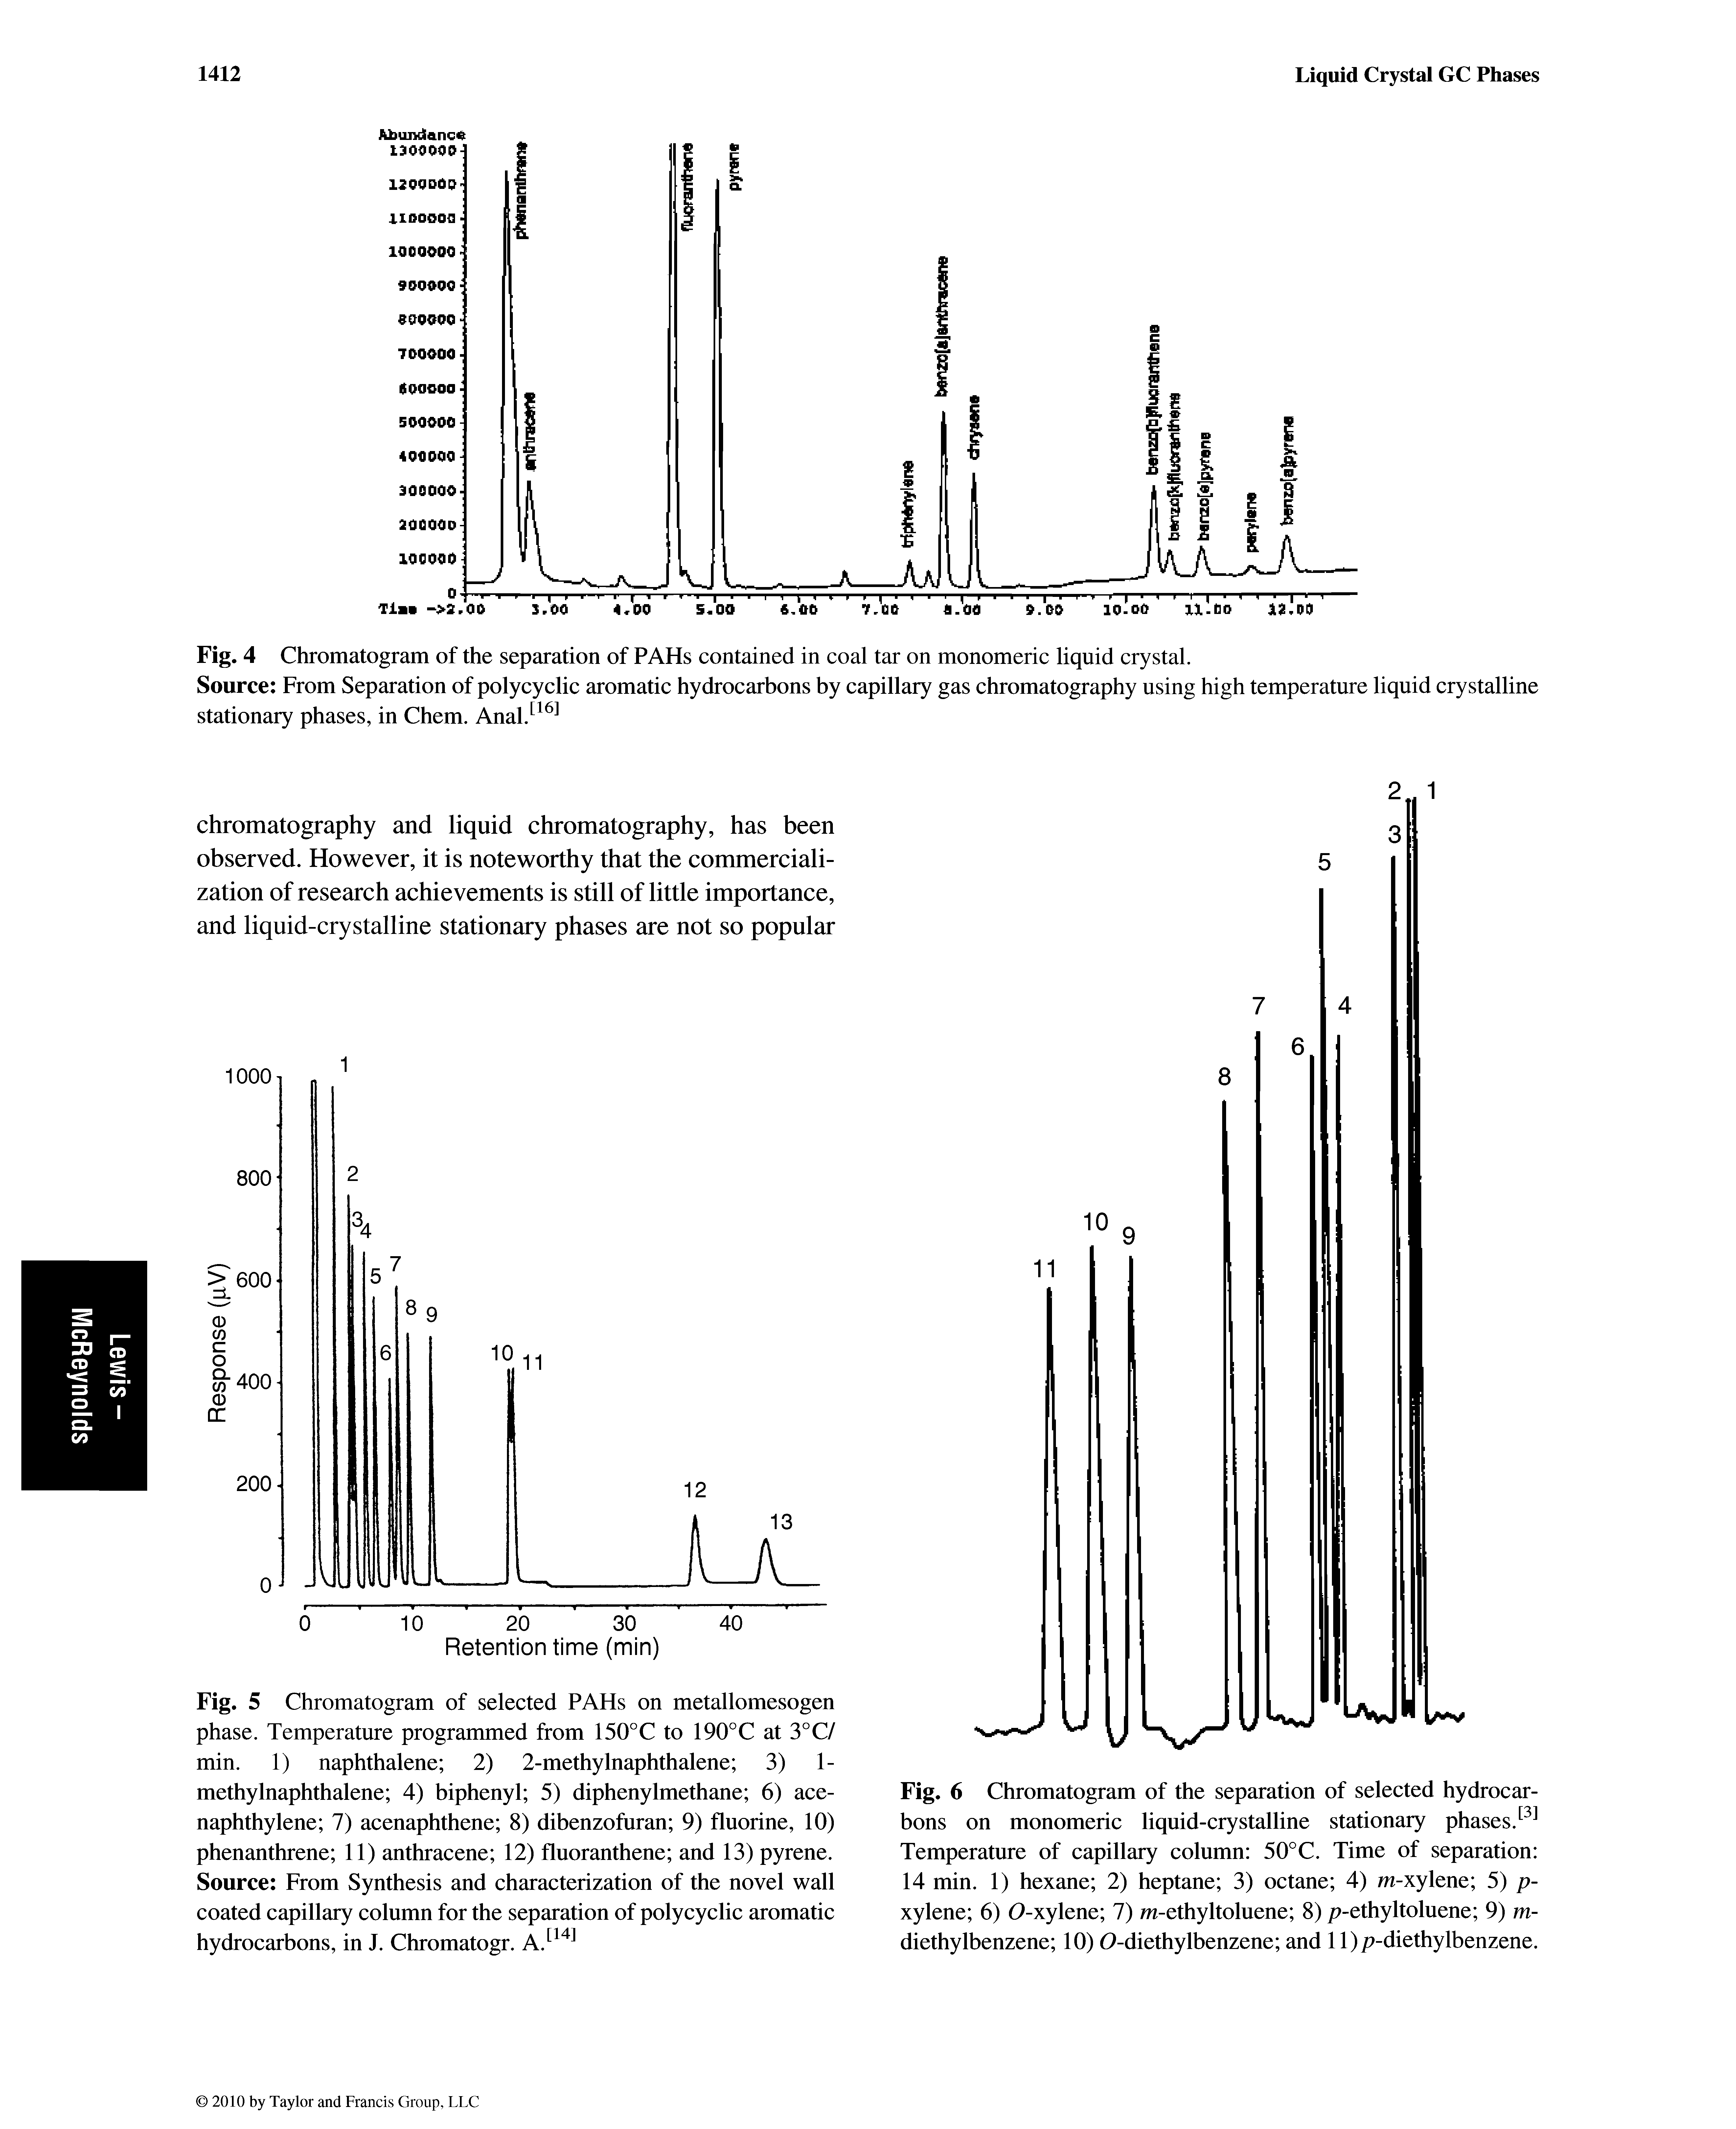 Fig. 6 Chromatogram of the separation of selected hydrocarbons on monomeric liquid-crystalline stationary phases. Temperature of capillary column 50°C. Time of separation 14 min. 1) hexane 2) heptane 3) octane 4) m-xylene 5) p-xylene 6) 0-xylene 7) m-ethyltoluene 8) p-ethyltoluene 9) m-diethylbenzene 10) O-diethylbenzene and 11) p-diethylbenzene.